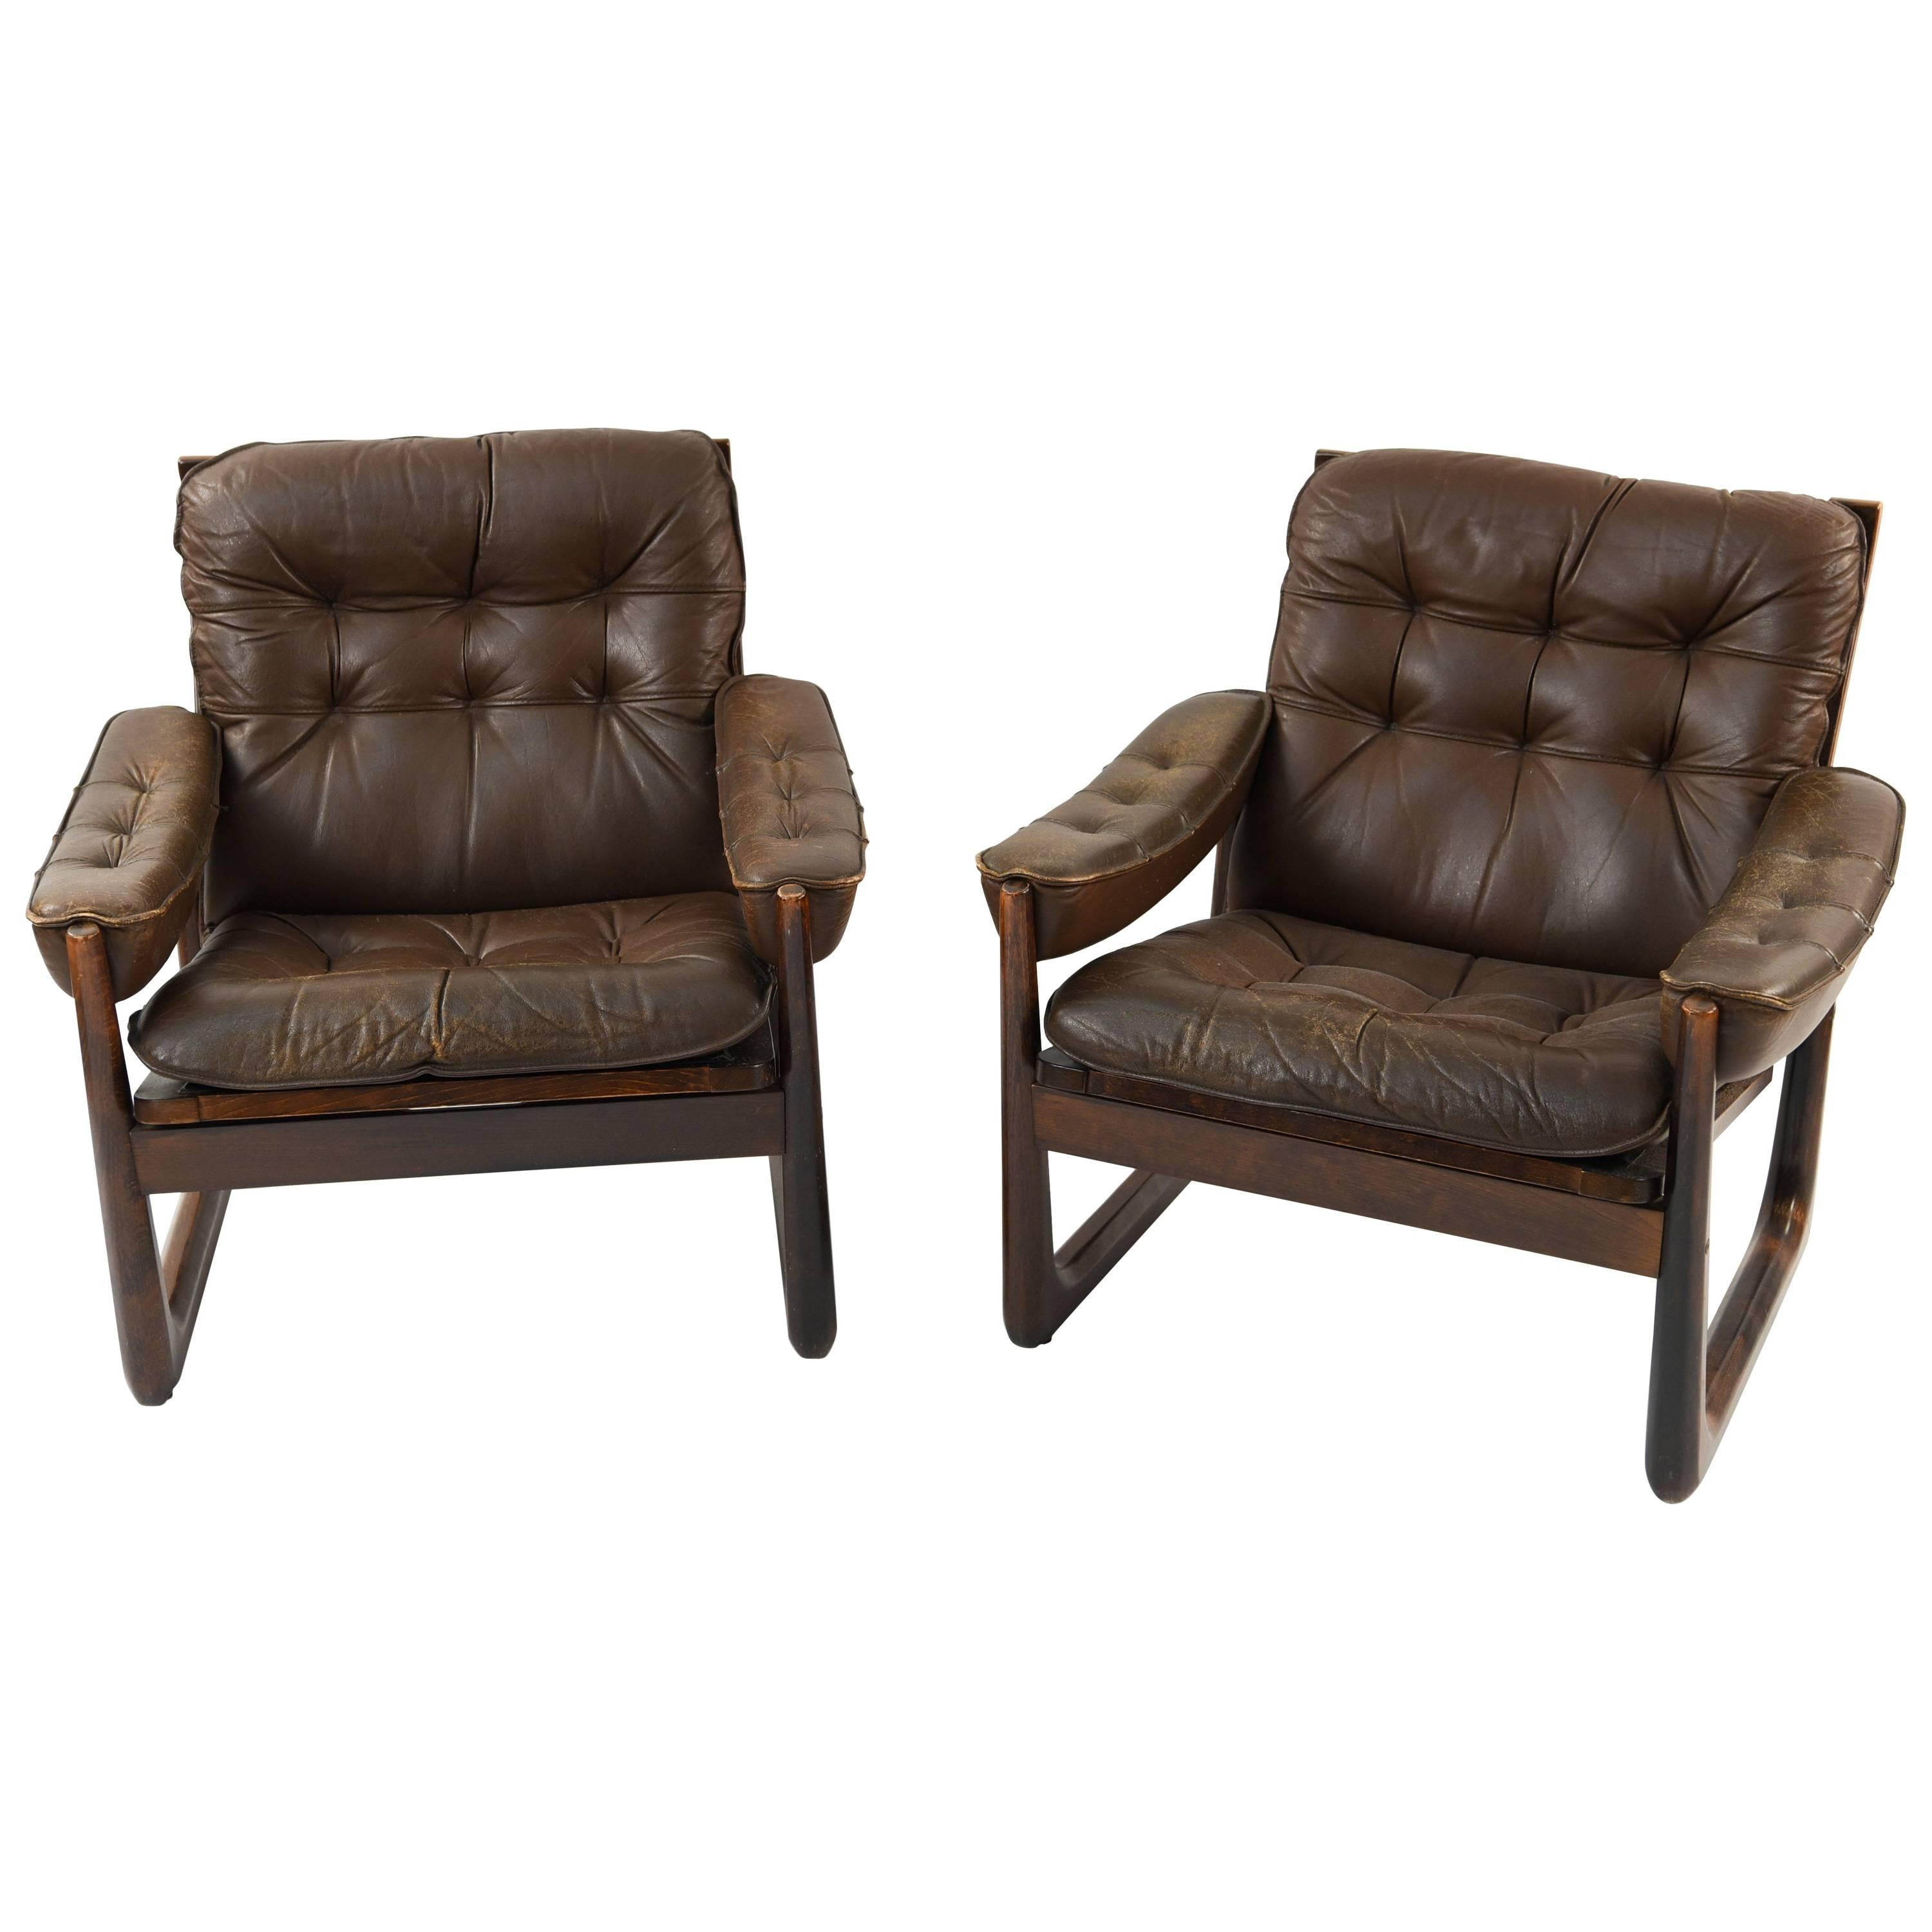 Pair of Norwegian Oddvar Vad Leather Lounge Chairs, circa 1970s